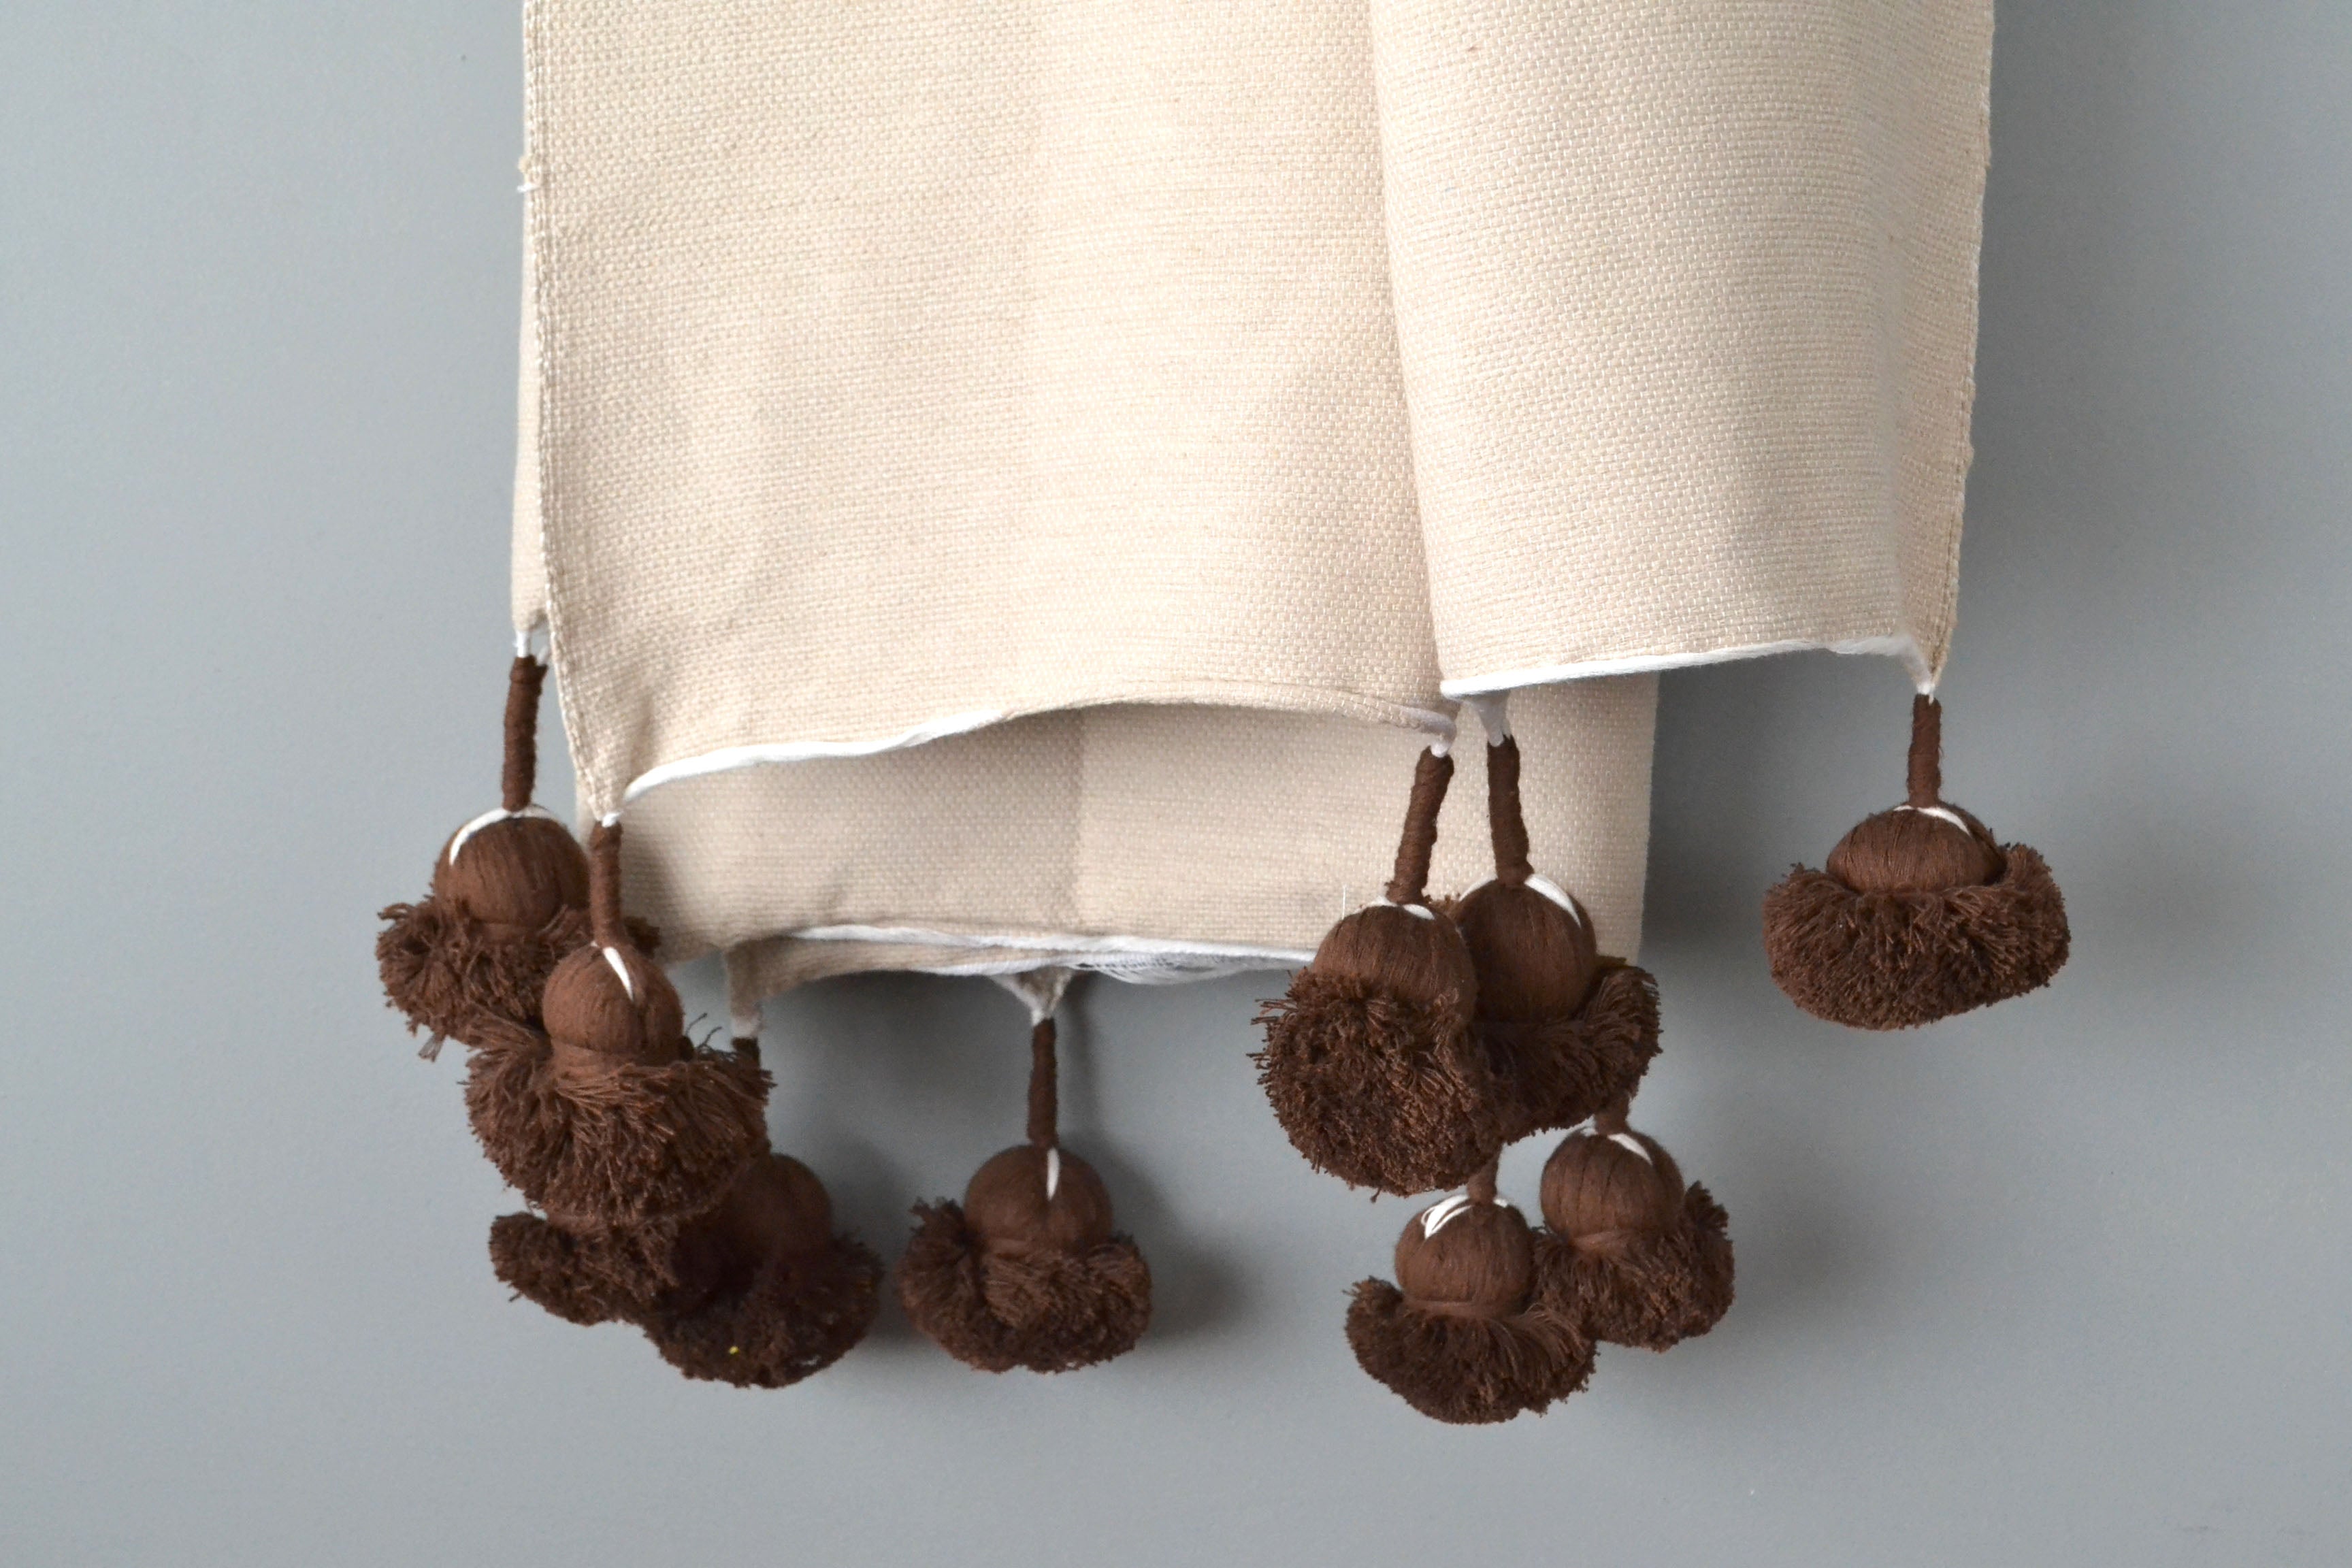 Natural Cotton Throw with Chocolate Brown Pom Poms from Yuba Mercantile